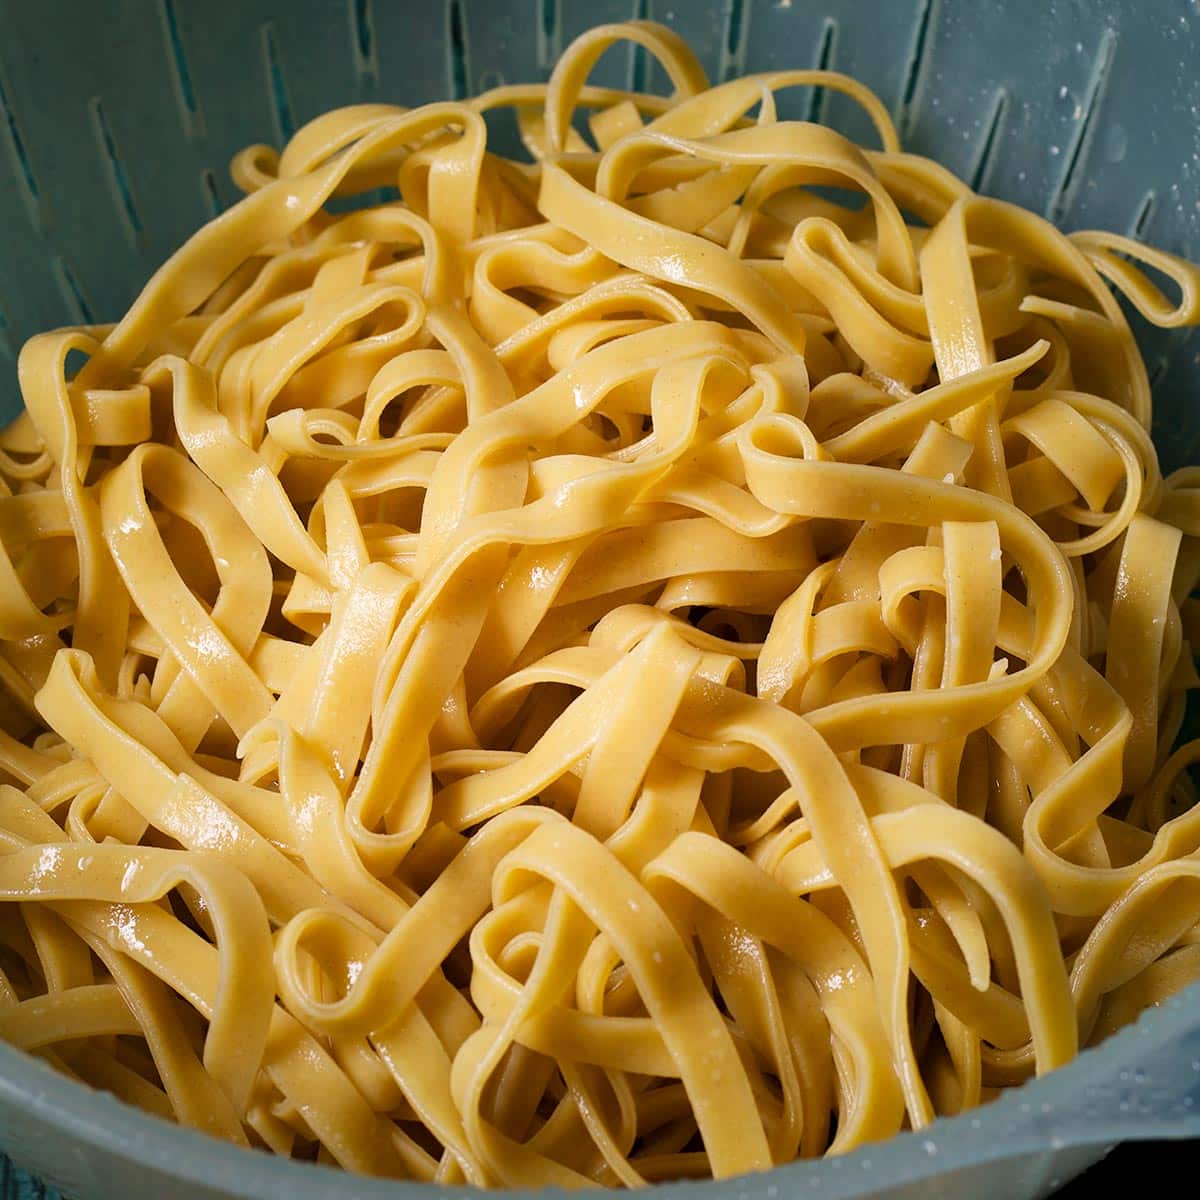 Freshly cooked fettuccini noodles in a strainer set inside a bowl to allow the water to drain out.